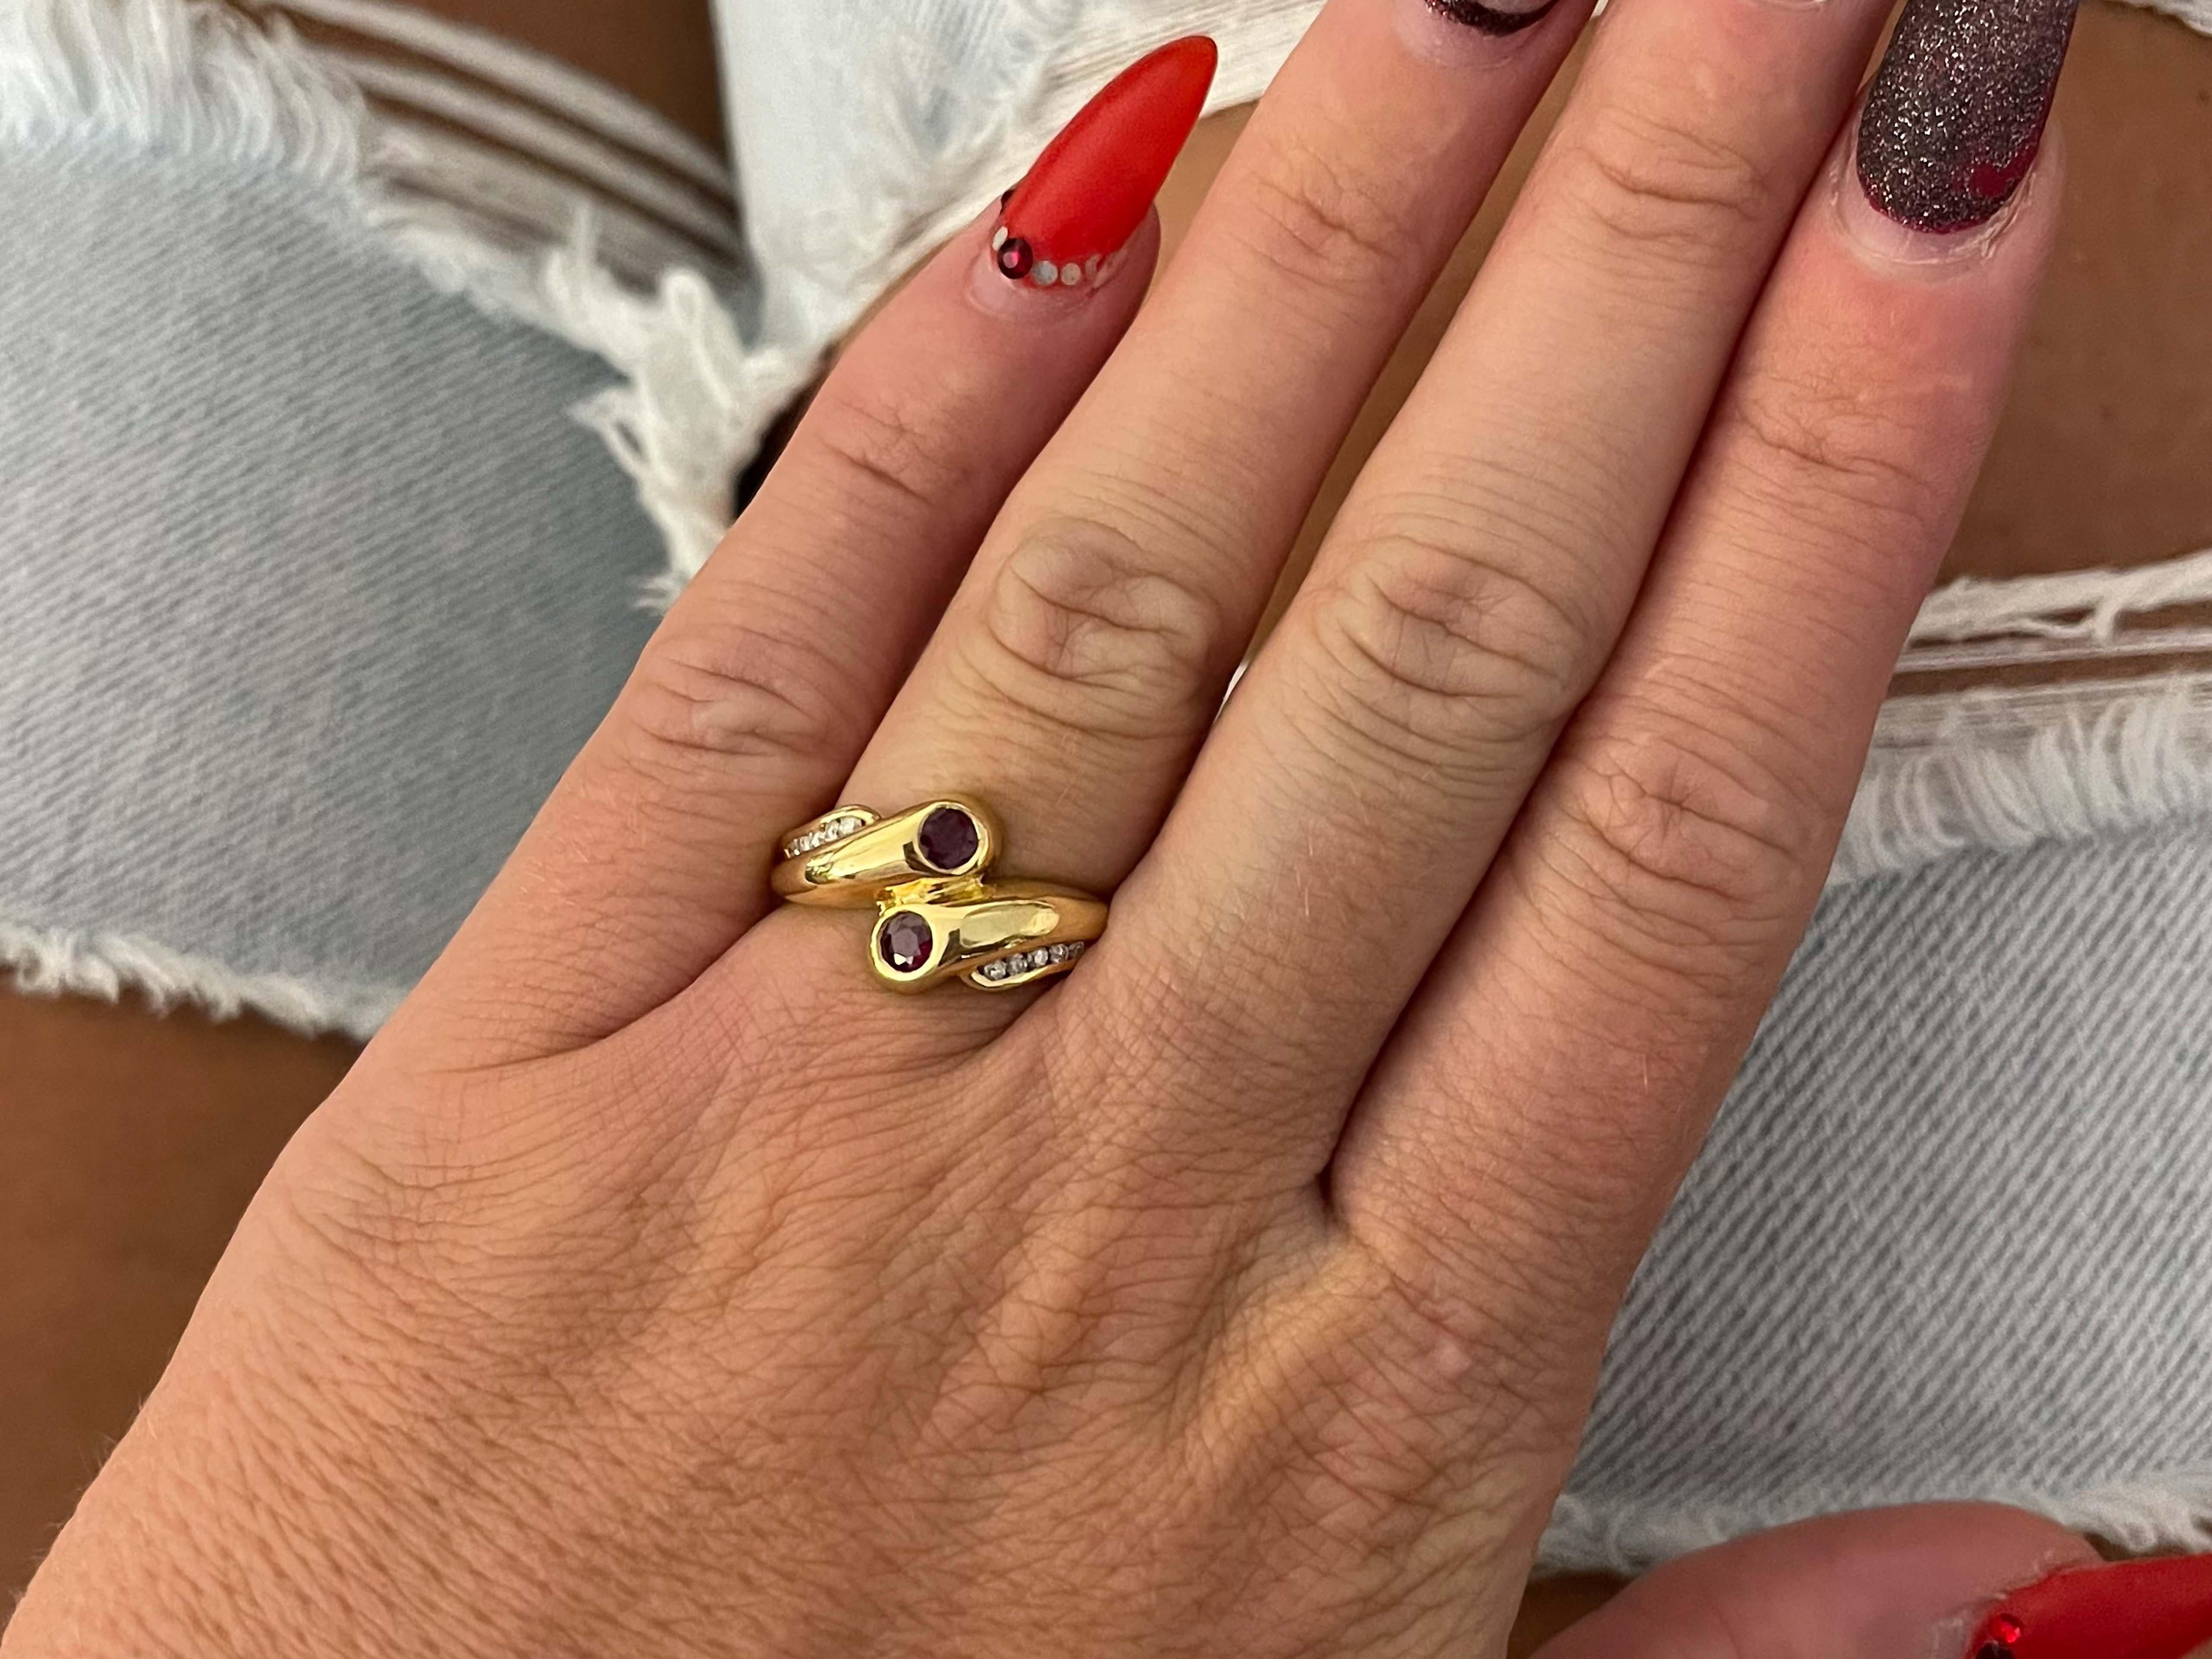 Item Specifications:

Metal: 14K Yellow Gold

Style: Statement Ring

Ring Size: 8 (resizing available for a fee)

Total Weight: 4.60 Grams

Ring Height: 11.5 mm

Gemstone Specifications:

Gemstone: 2 Ruby

Shape: Round

Diameter: ~6 mm
​
​Ruby Carat